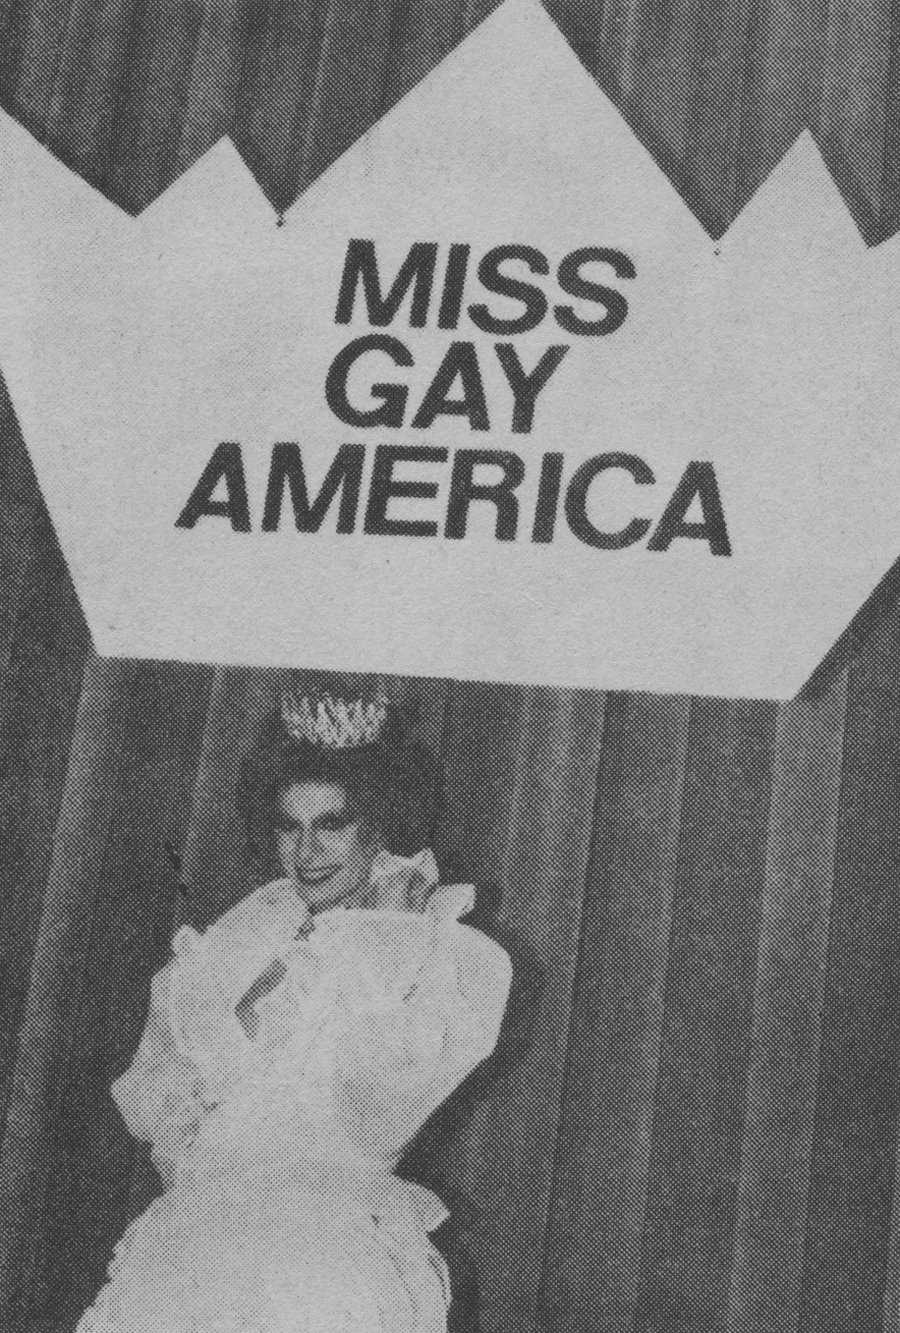 Jennifer Foxx, moments after being crowned as Miss Gay America 1982. (Dallas Convention Center; Dallas, TX; September 1981)